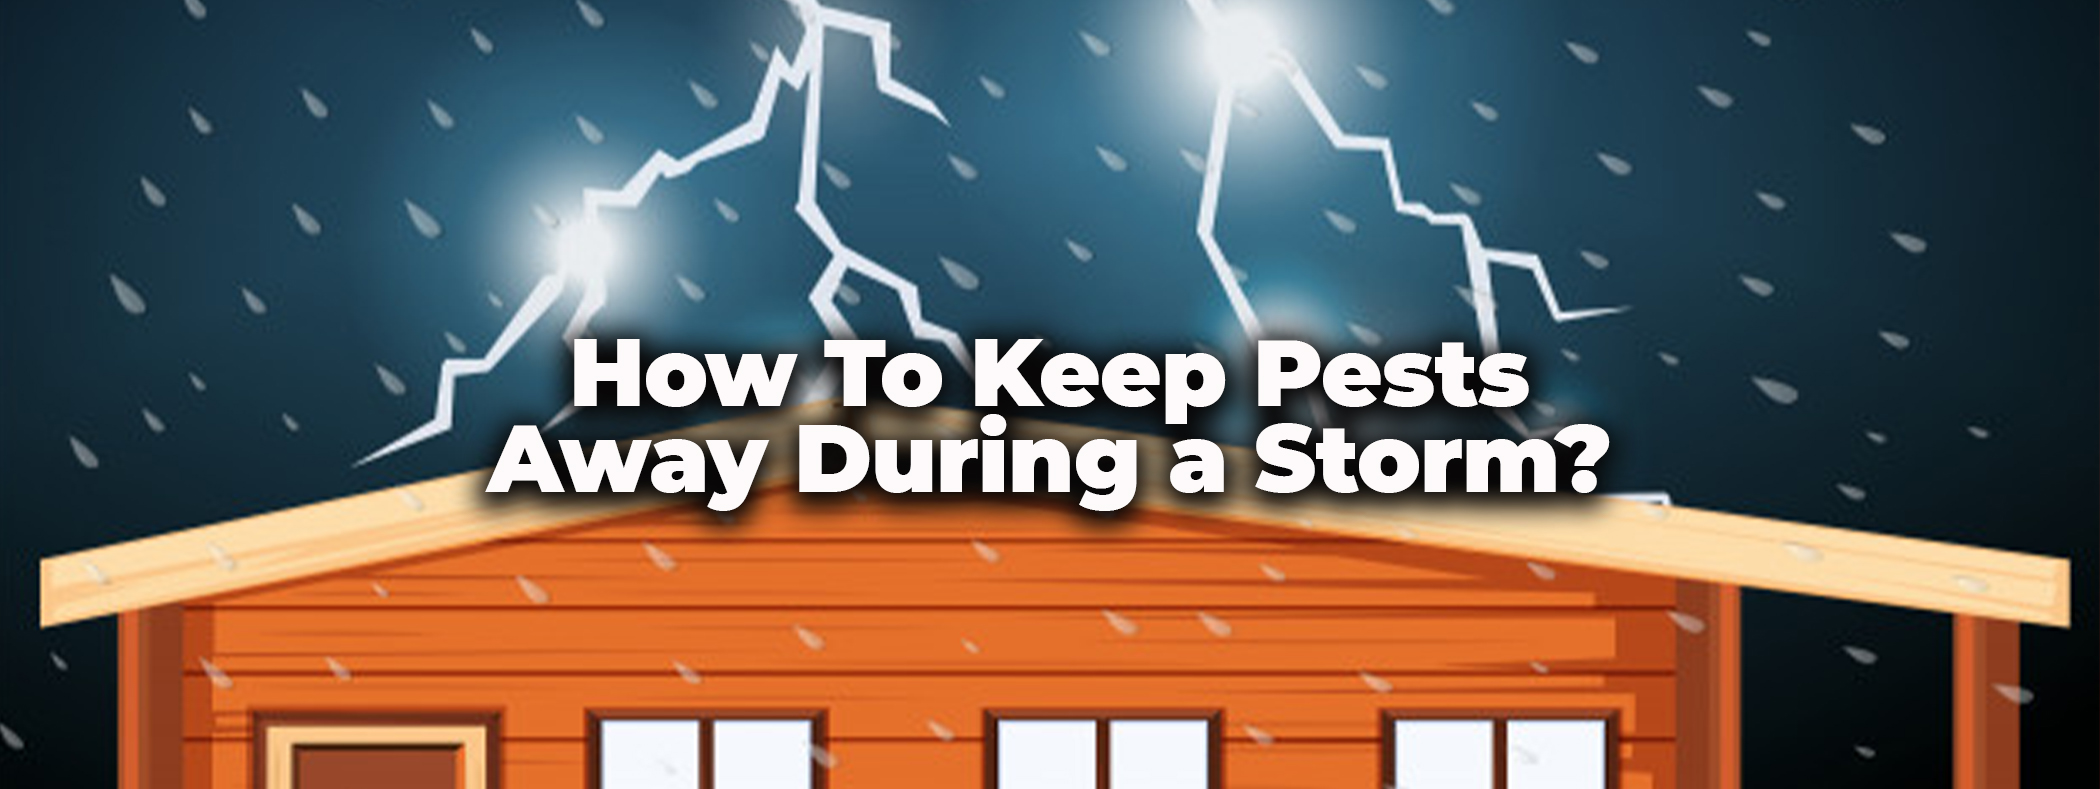 How To Keep Pests Away During a Storm